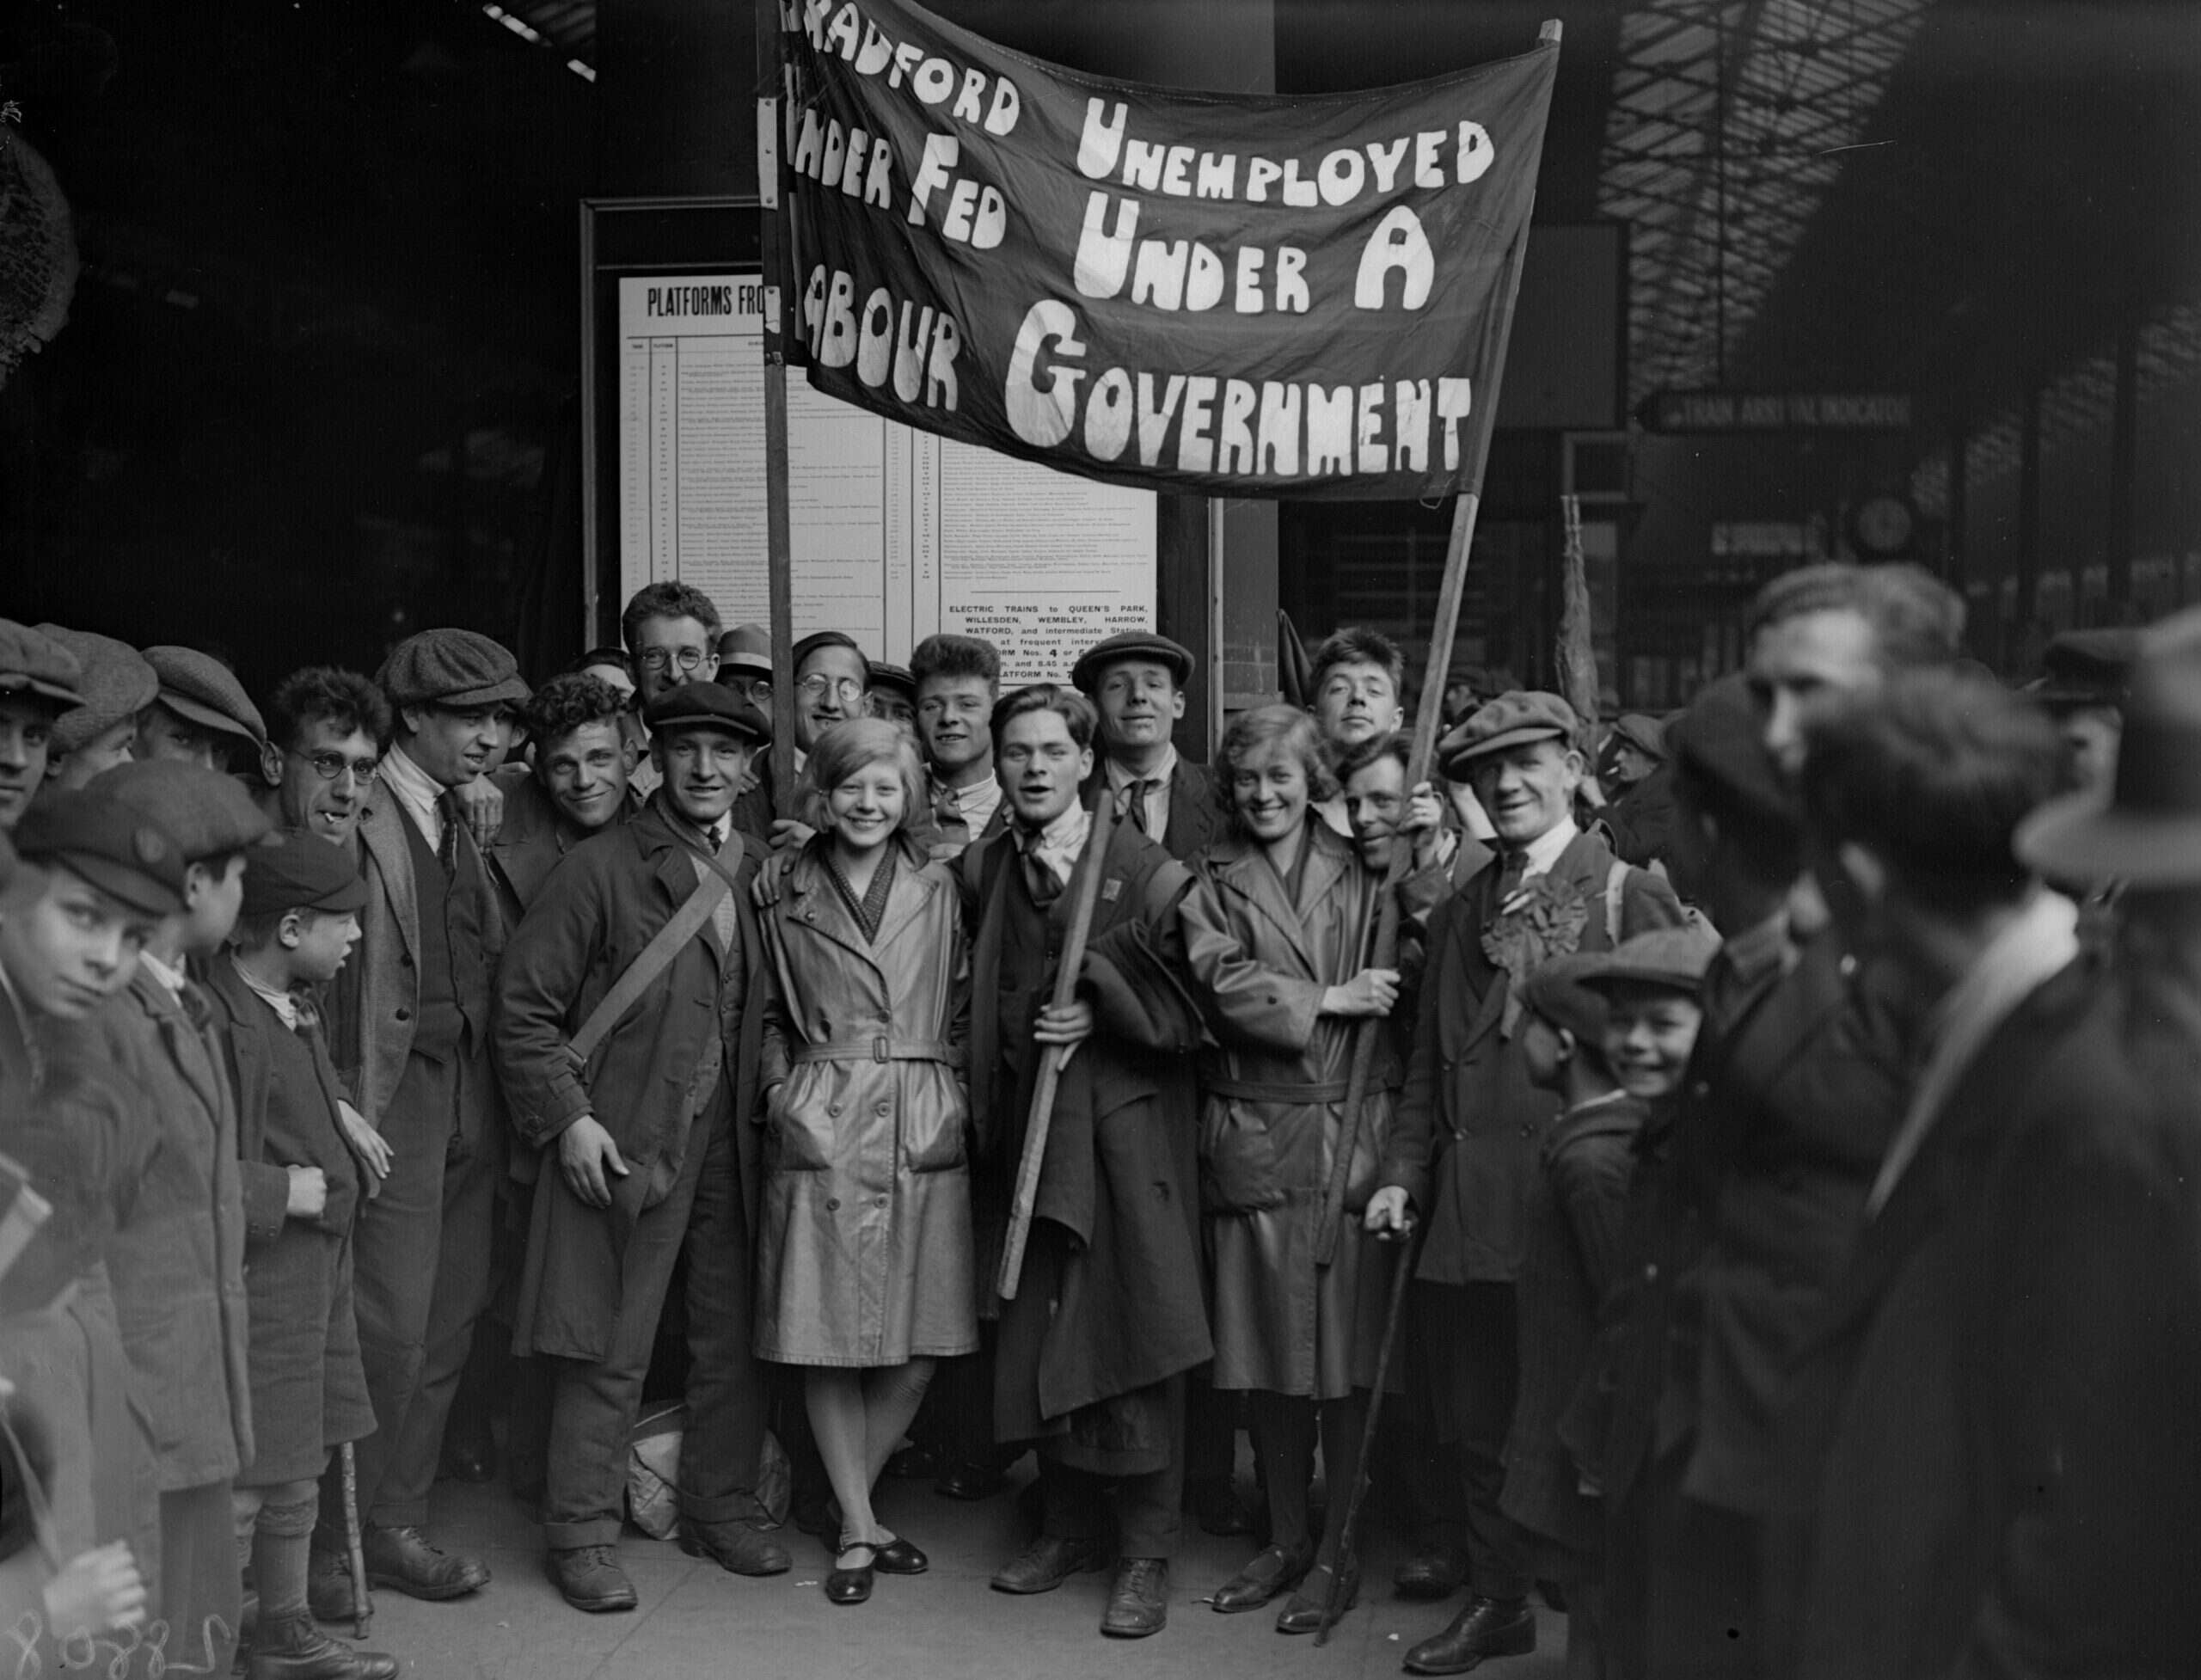 From the NS Archive: Labour’s opportunity